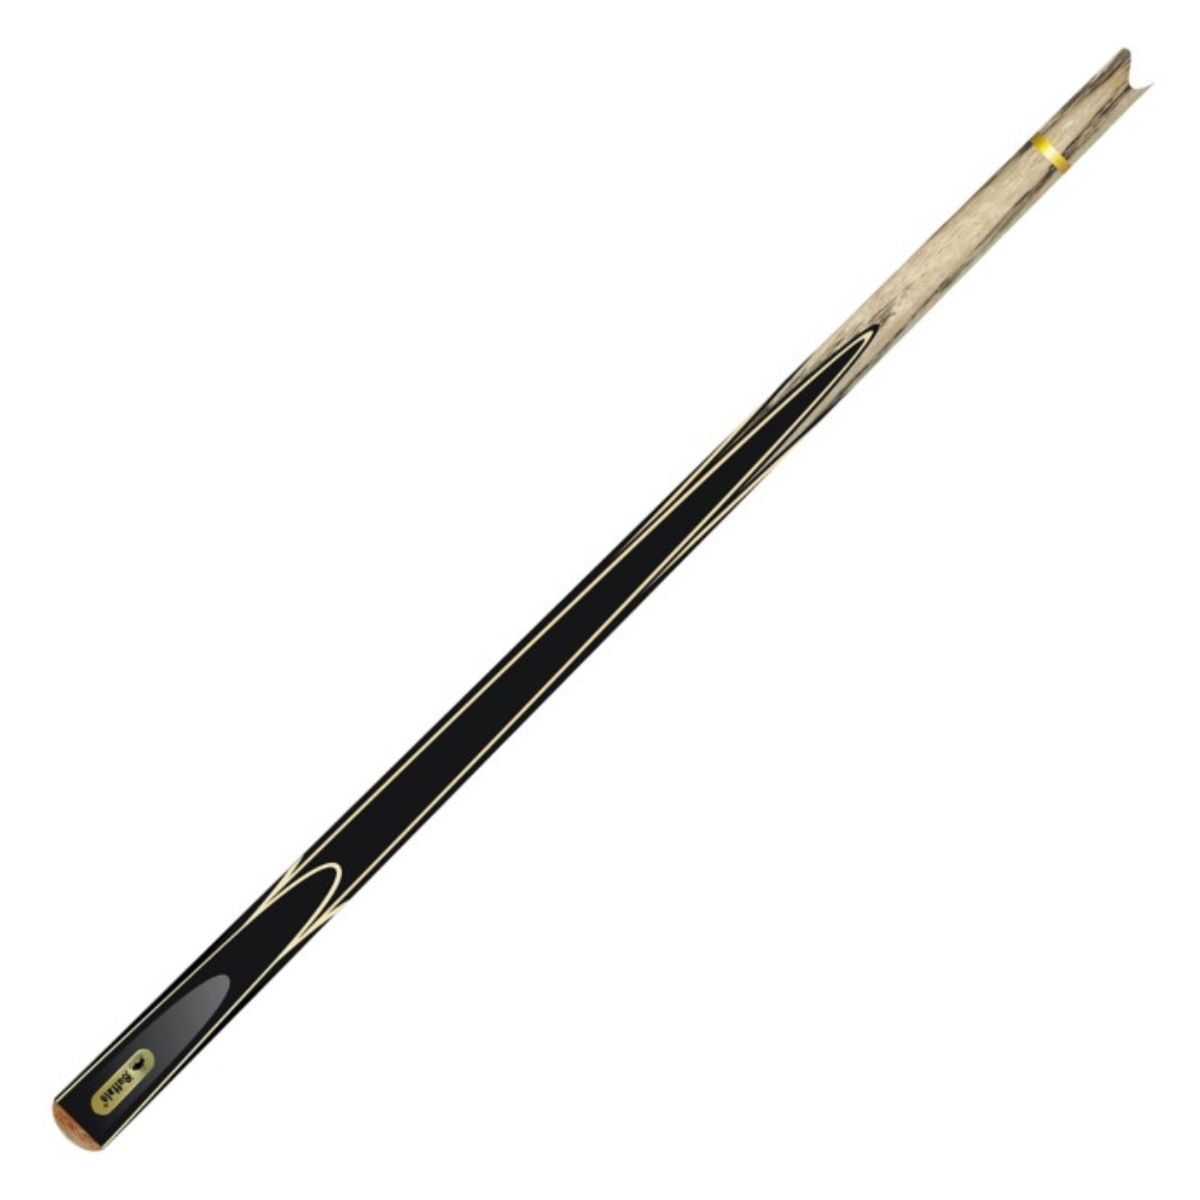 Buffalo Luxe 1 Centre Jointed British Pool Cue